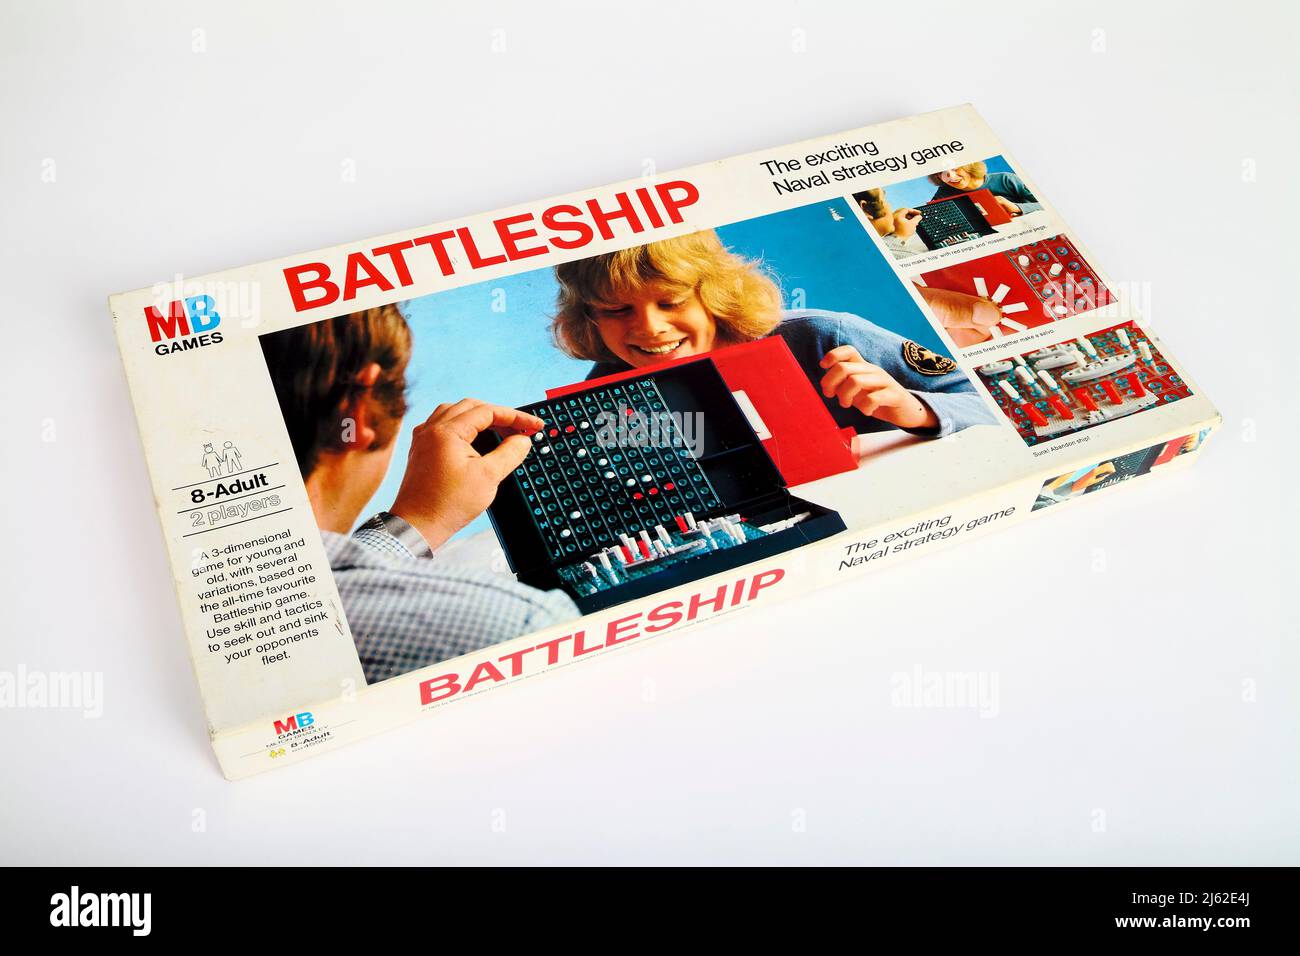 Mb Games Battleship tactical naval war strategy game for two players Stock Photo